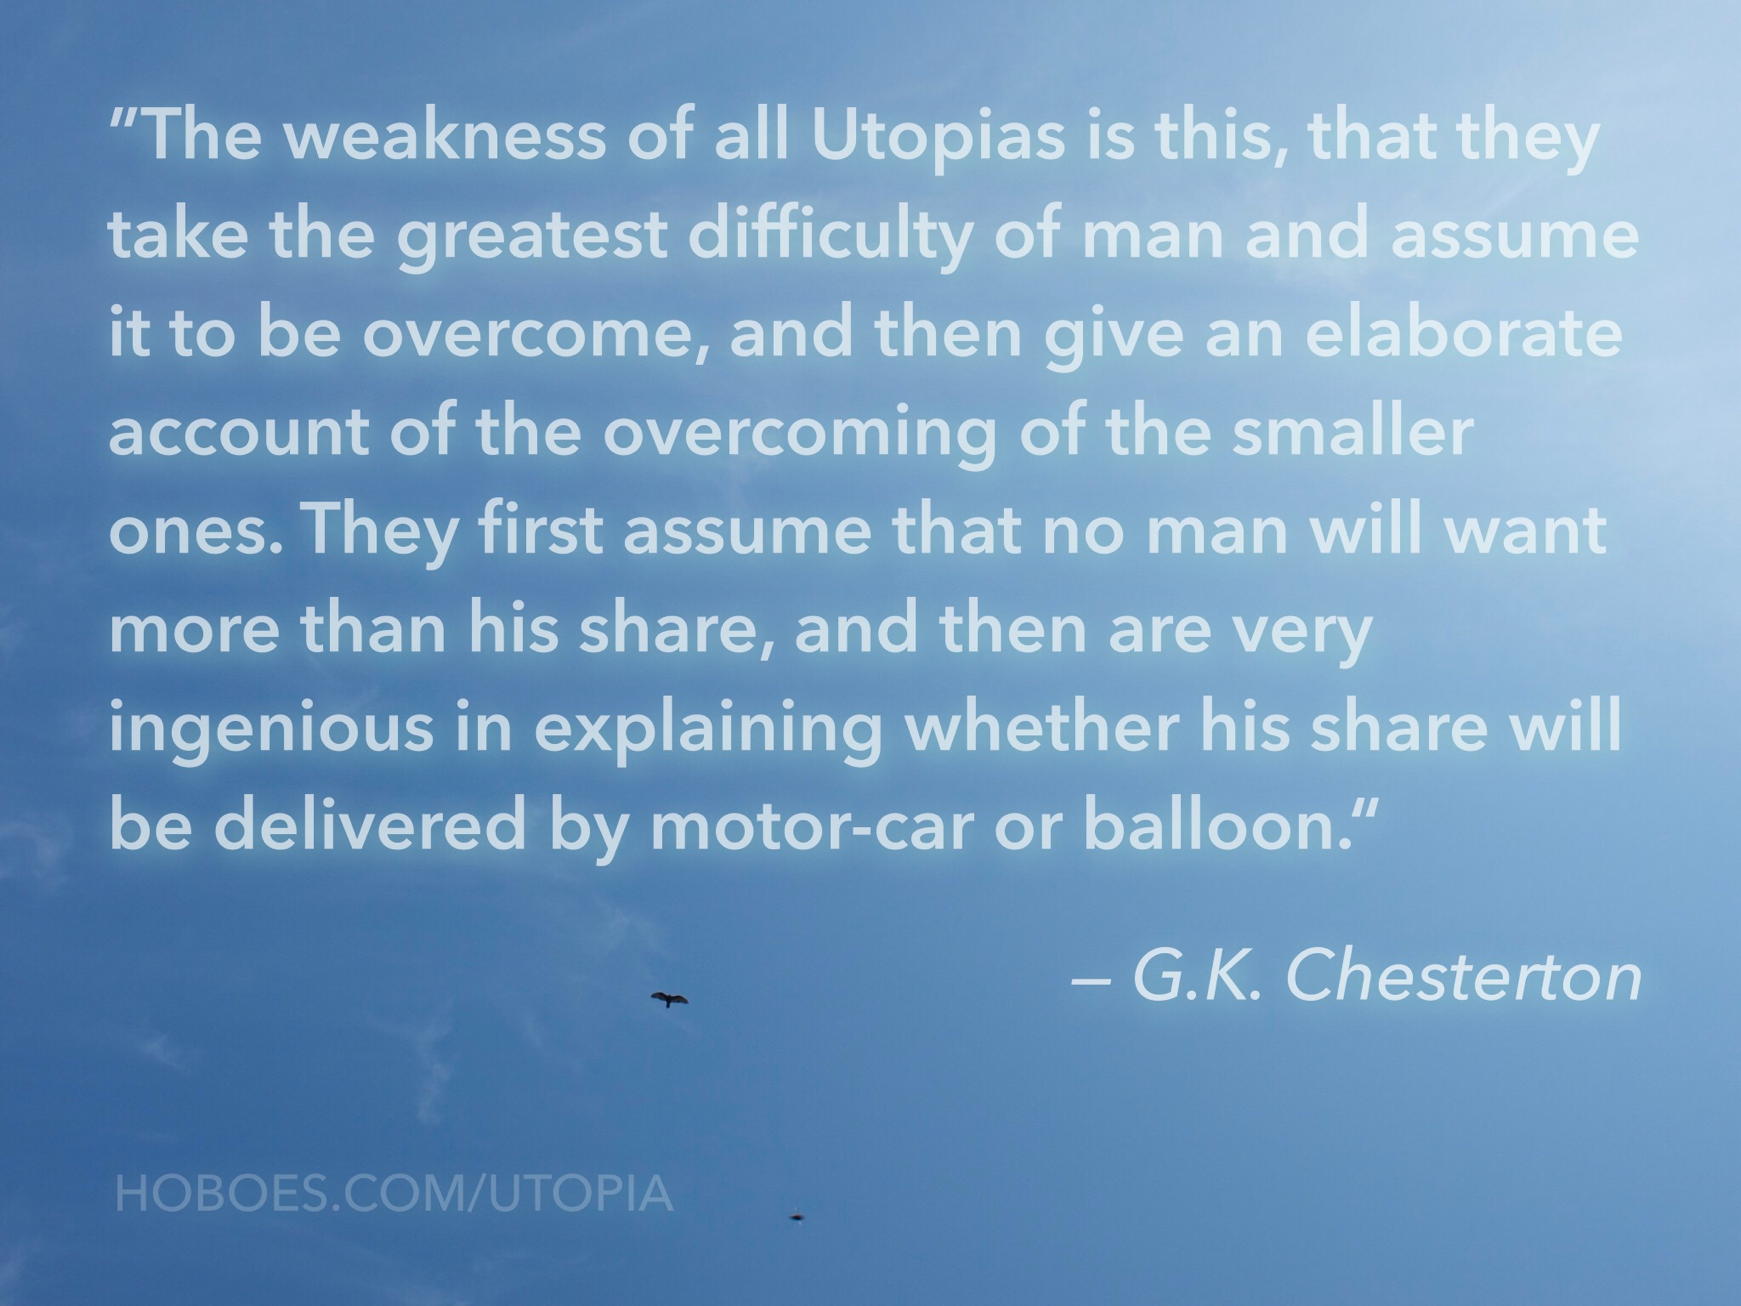 The weakness of all Utopias